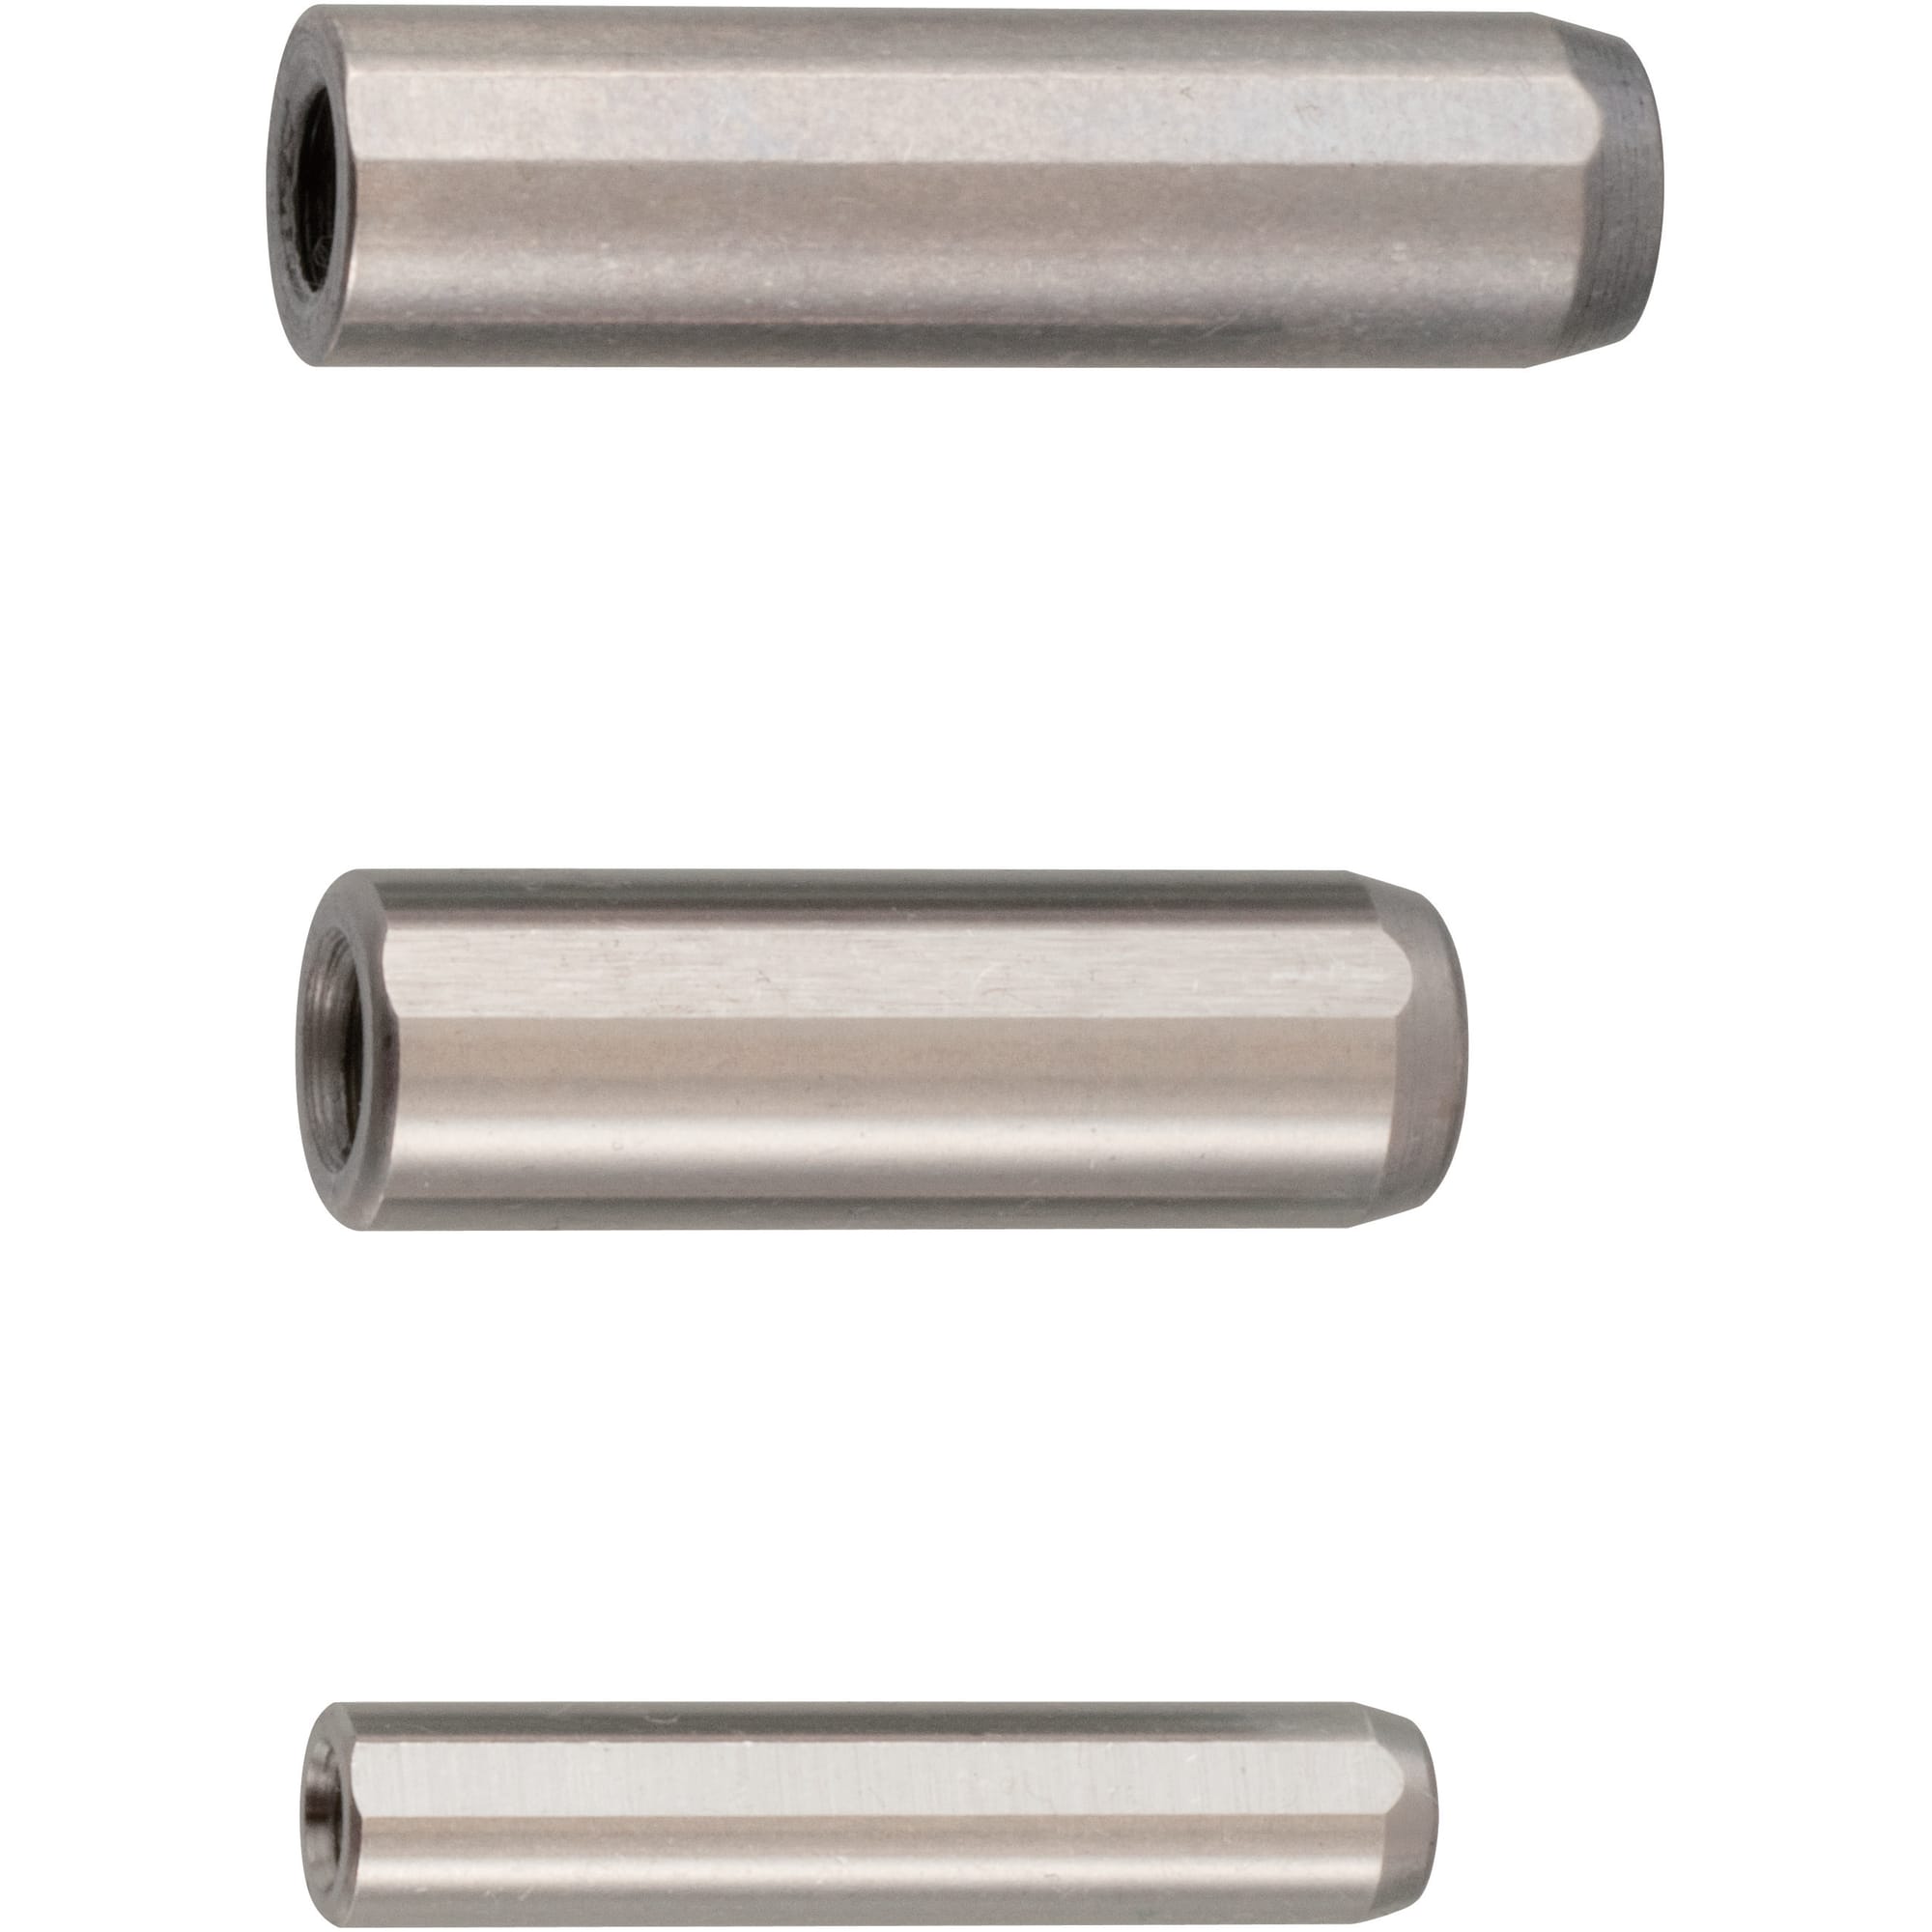 1/8" x 1" Dowel Pin Hardened And Ground Alloy Steel Bright Finish 